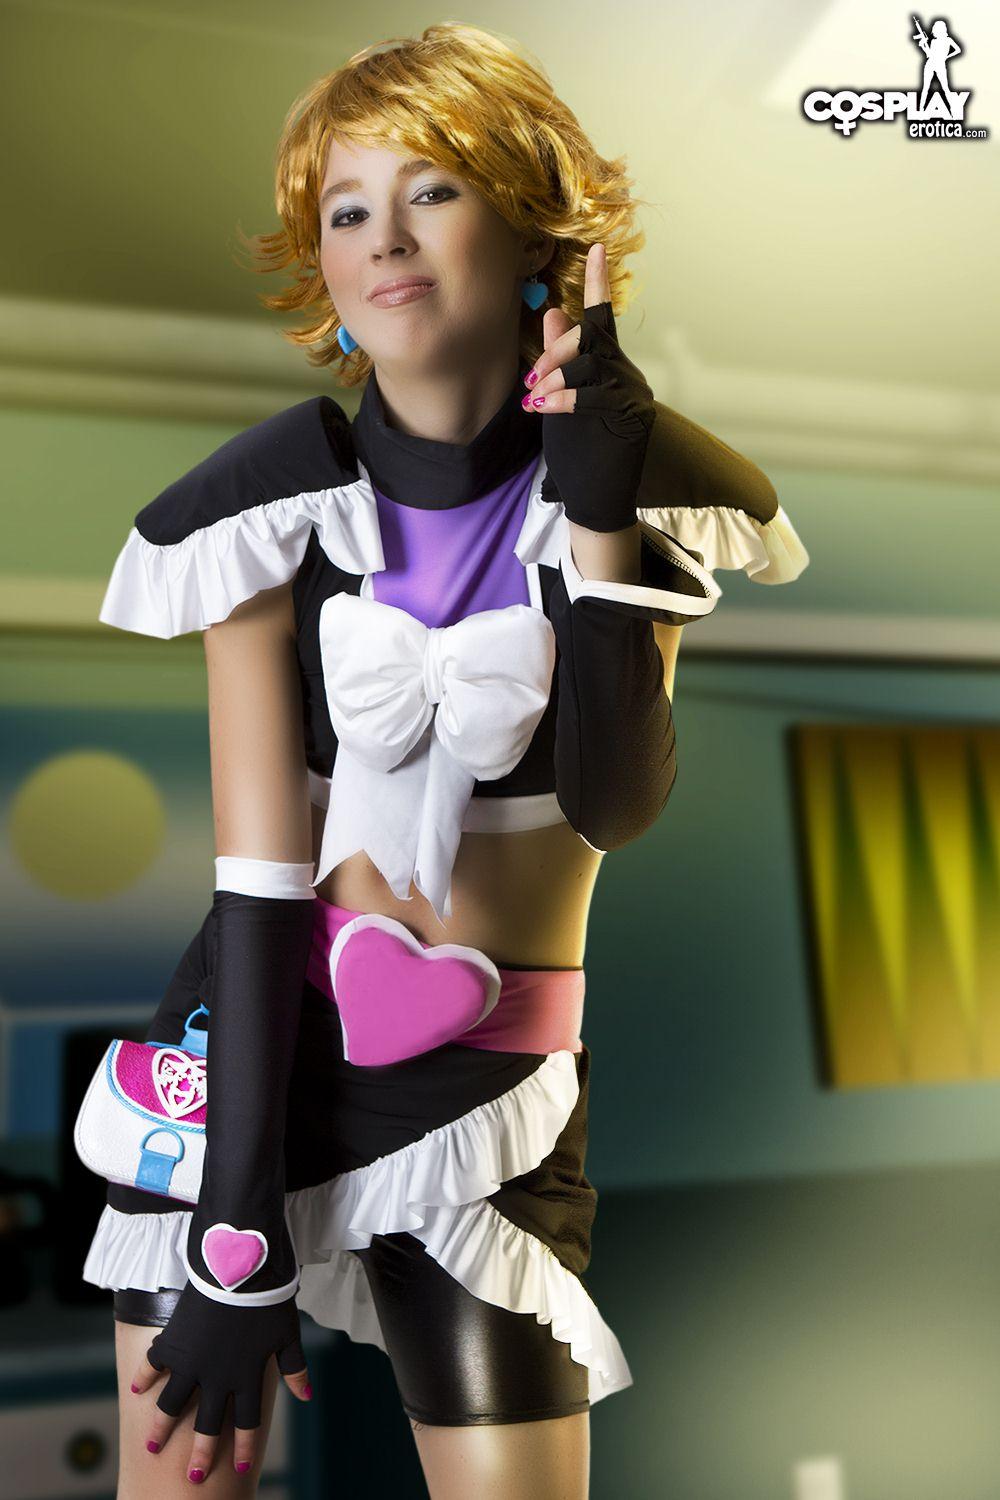 Sexy cosplayer Stacey gives some hot Pretty Cure anime fantasy #60007730